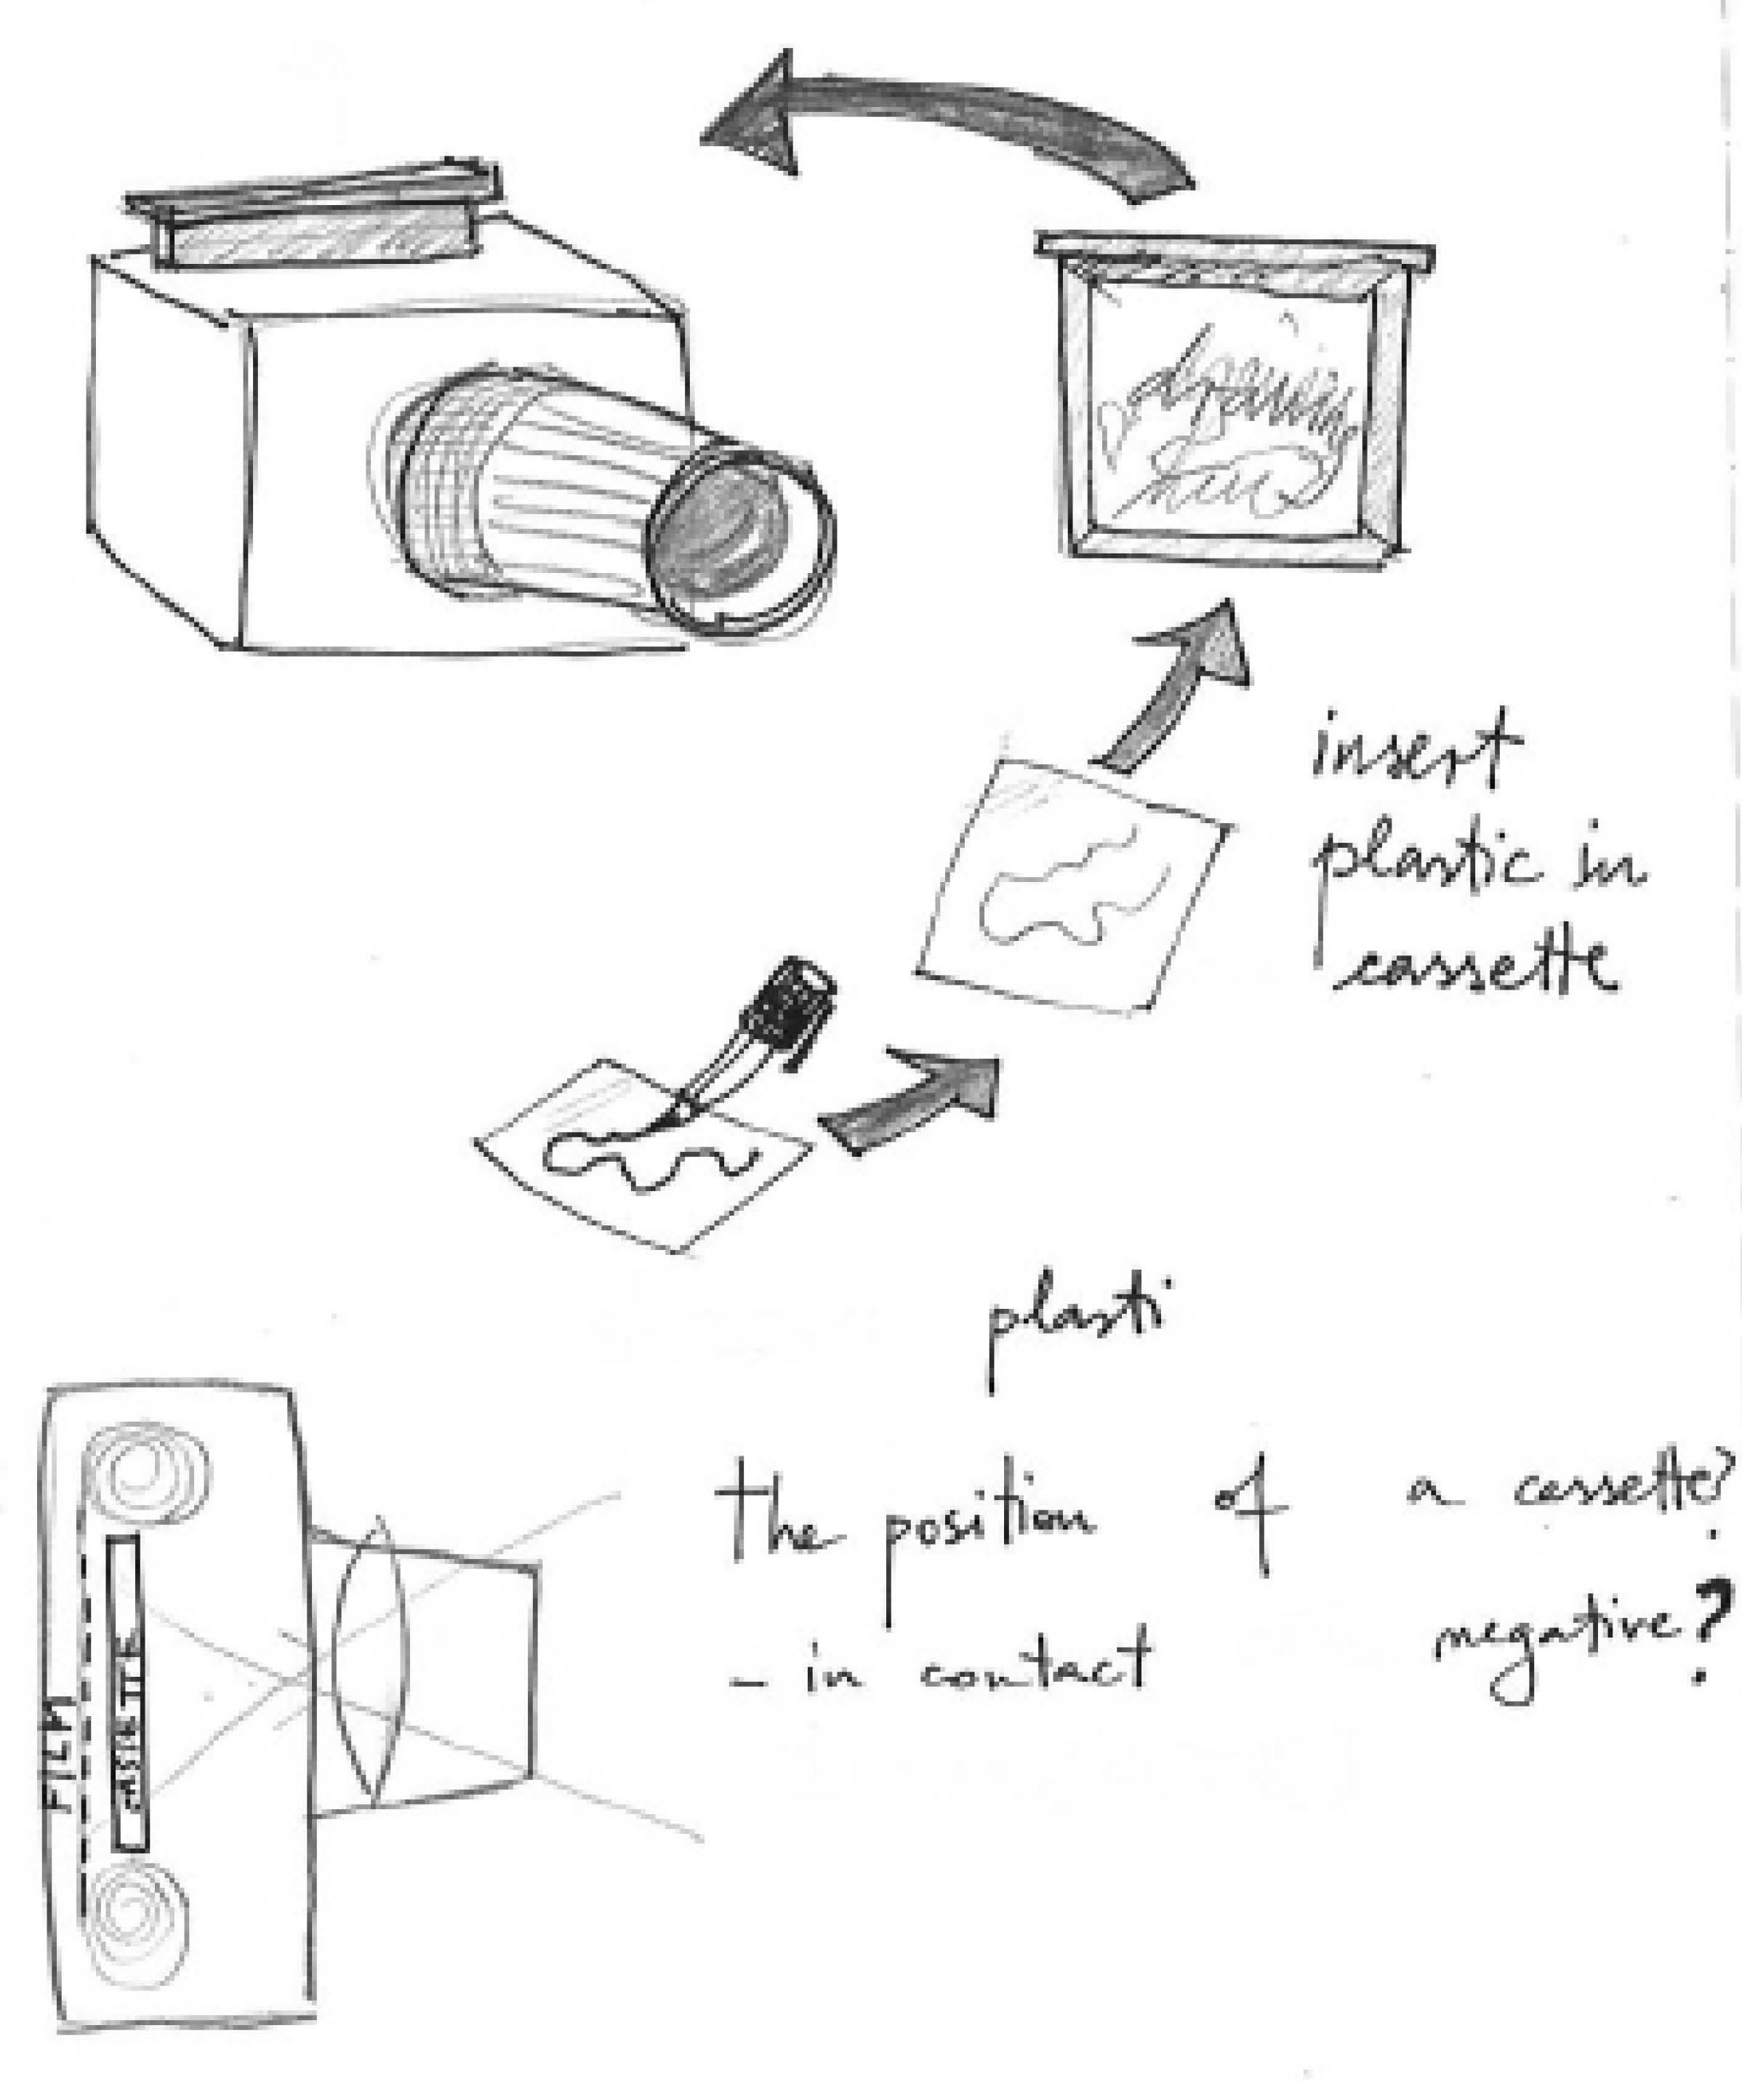 First sketches for the camera